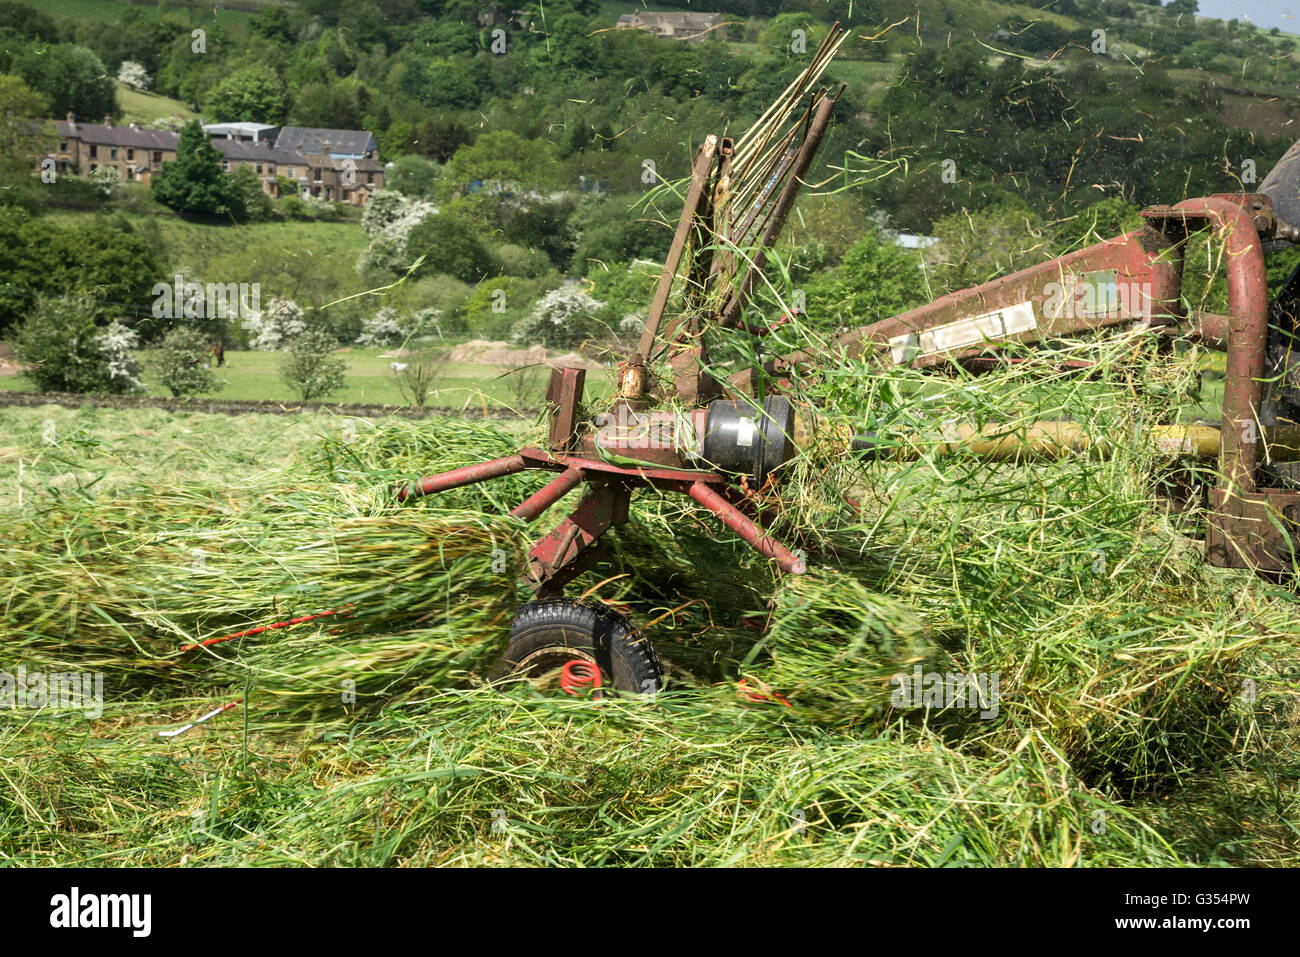 Farm machinery spinning grass in a hay meadow in the English countryside. Stock Photo